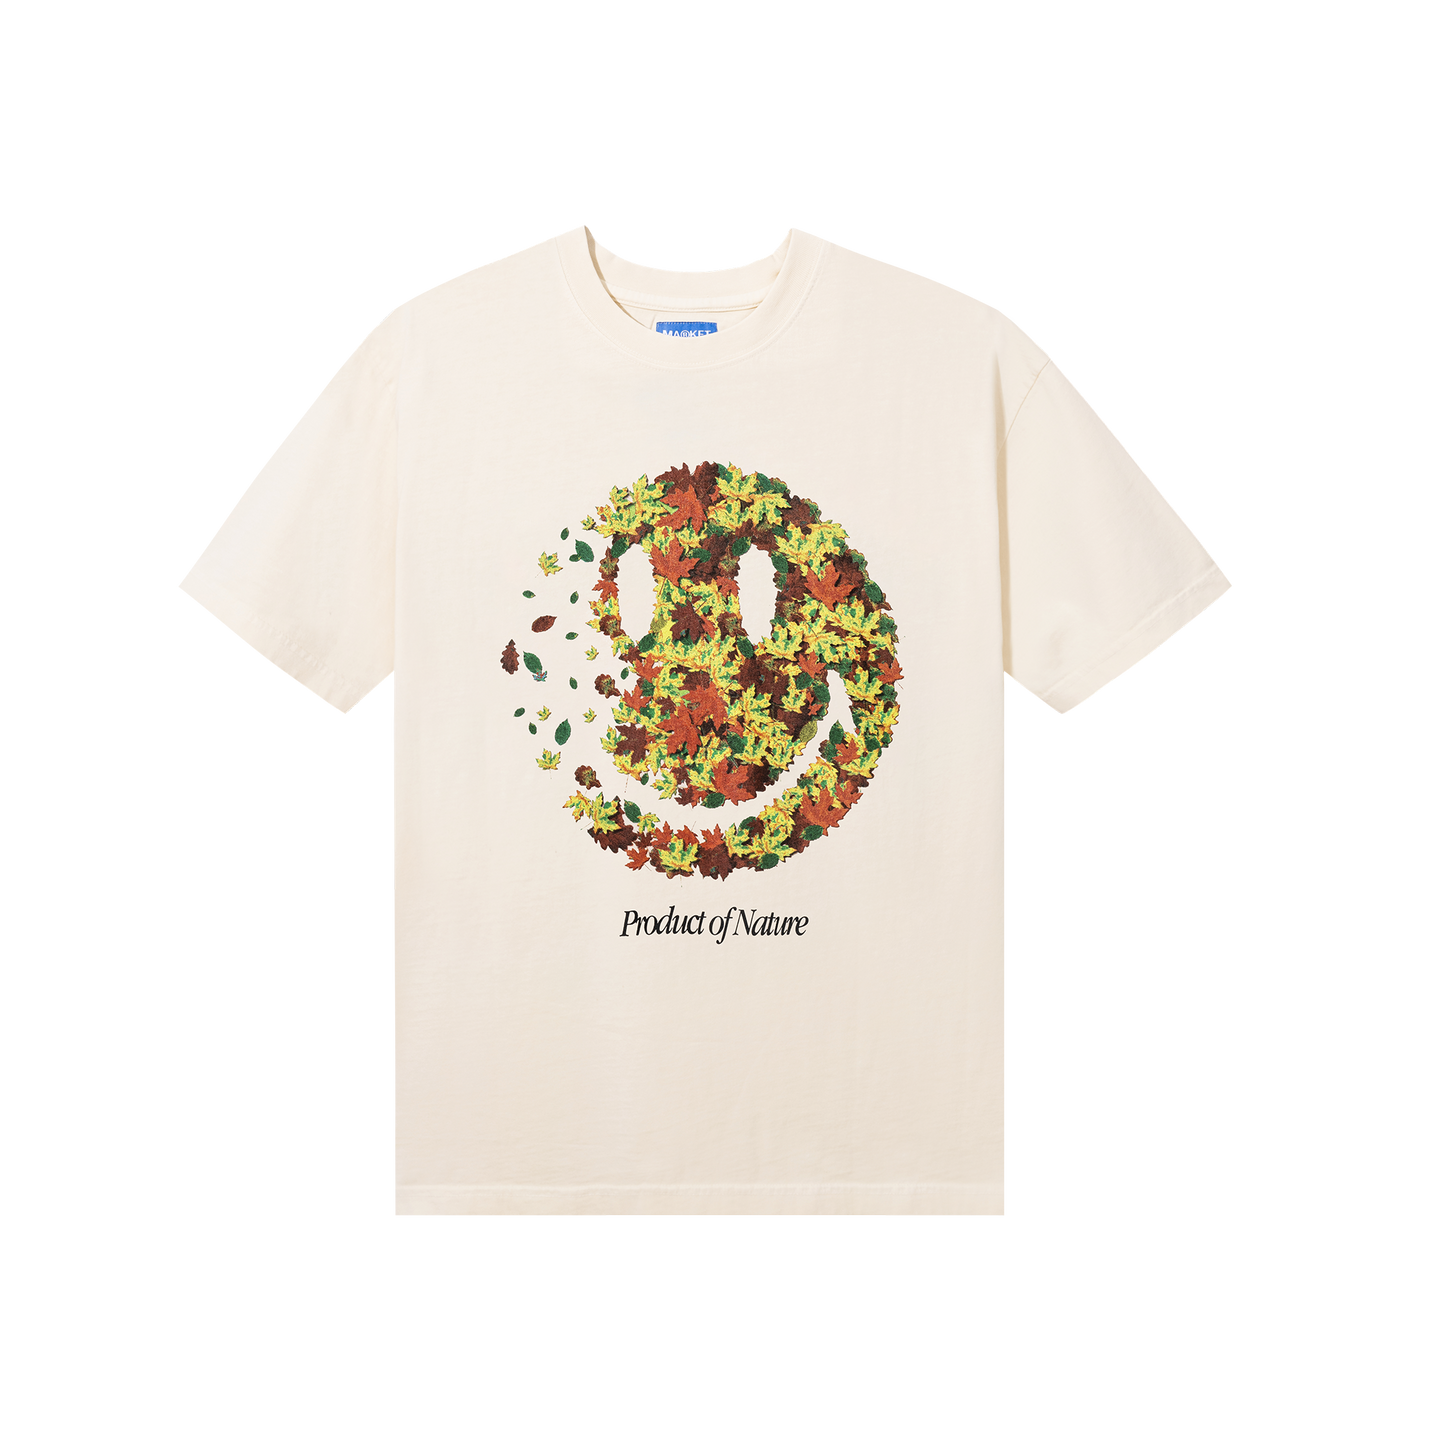 SMILEY PRODUCT OF NATURE T-SHIRT